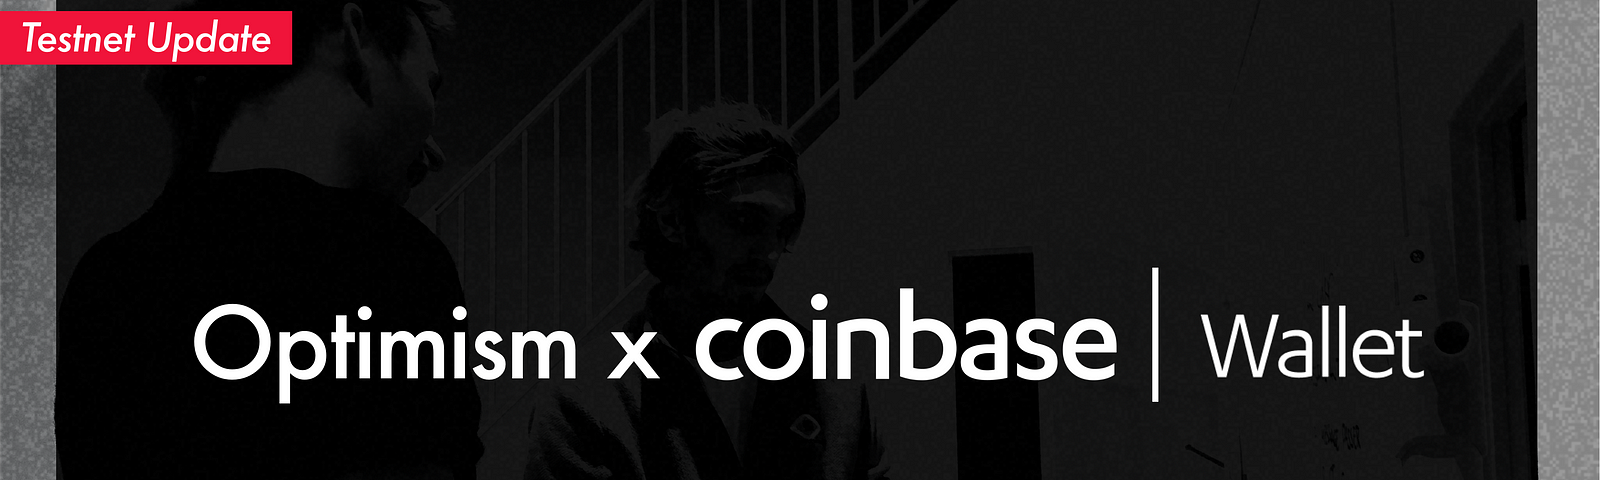 Black & white image of two Optimism devs looking at a whiteboard. Text overlaid on image reads Optimism x Coinbase Wallet.